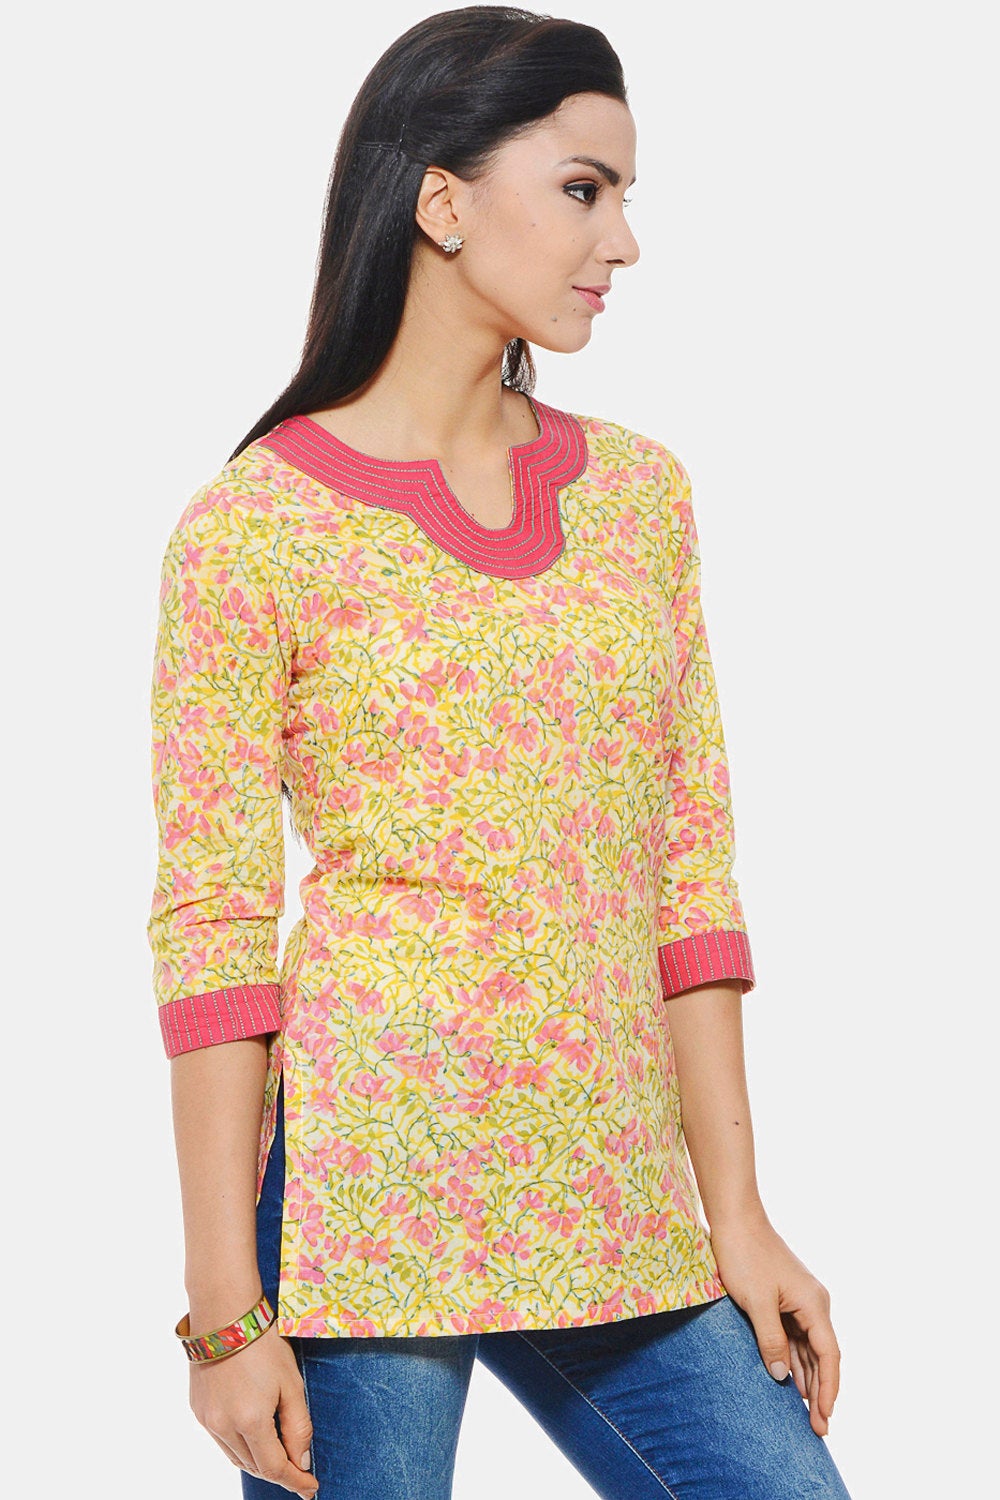 Hand Block printed Indian Kurti in yellow floral design with embroidery on neck and sleeves